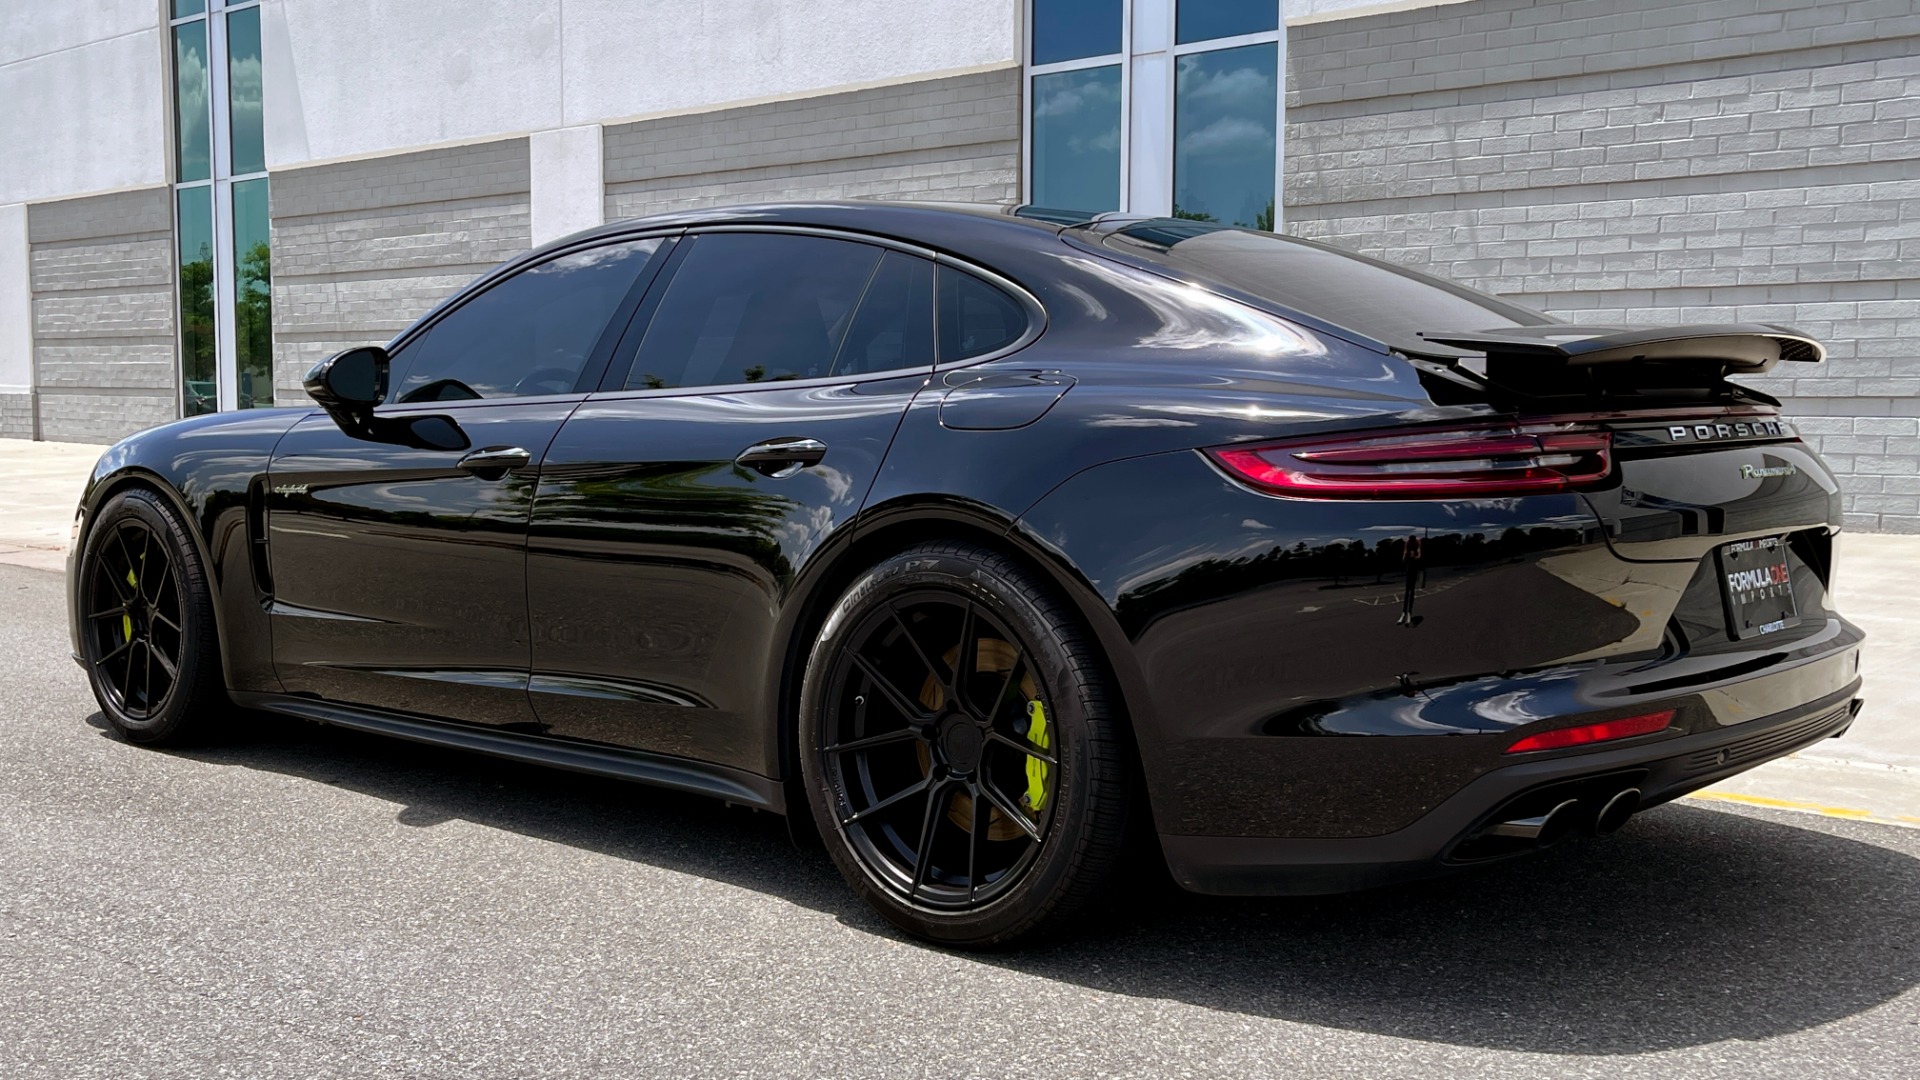 Used 2018 Porsche PANAMERA 4 E-HYBRID / AWD / NAV / SUNROOF / BOSE / REARVIEW for sale Sold at Formula Imports in Charlotte NC 28227 3